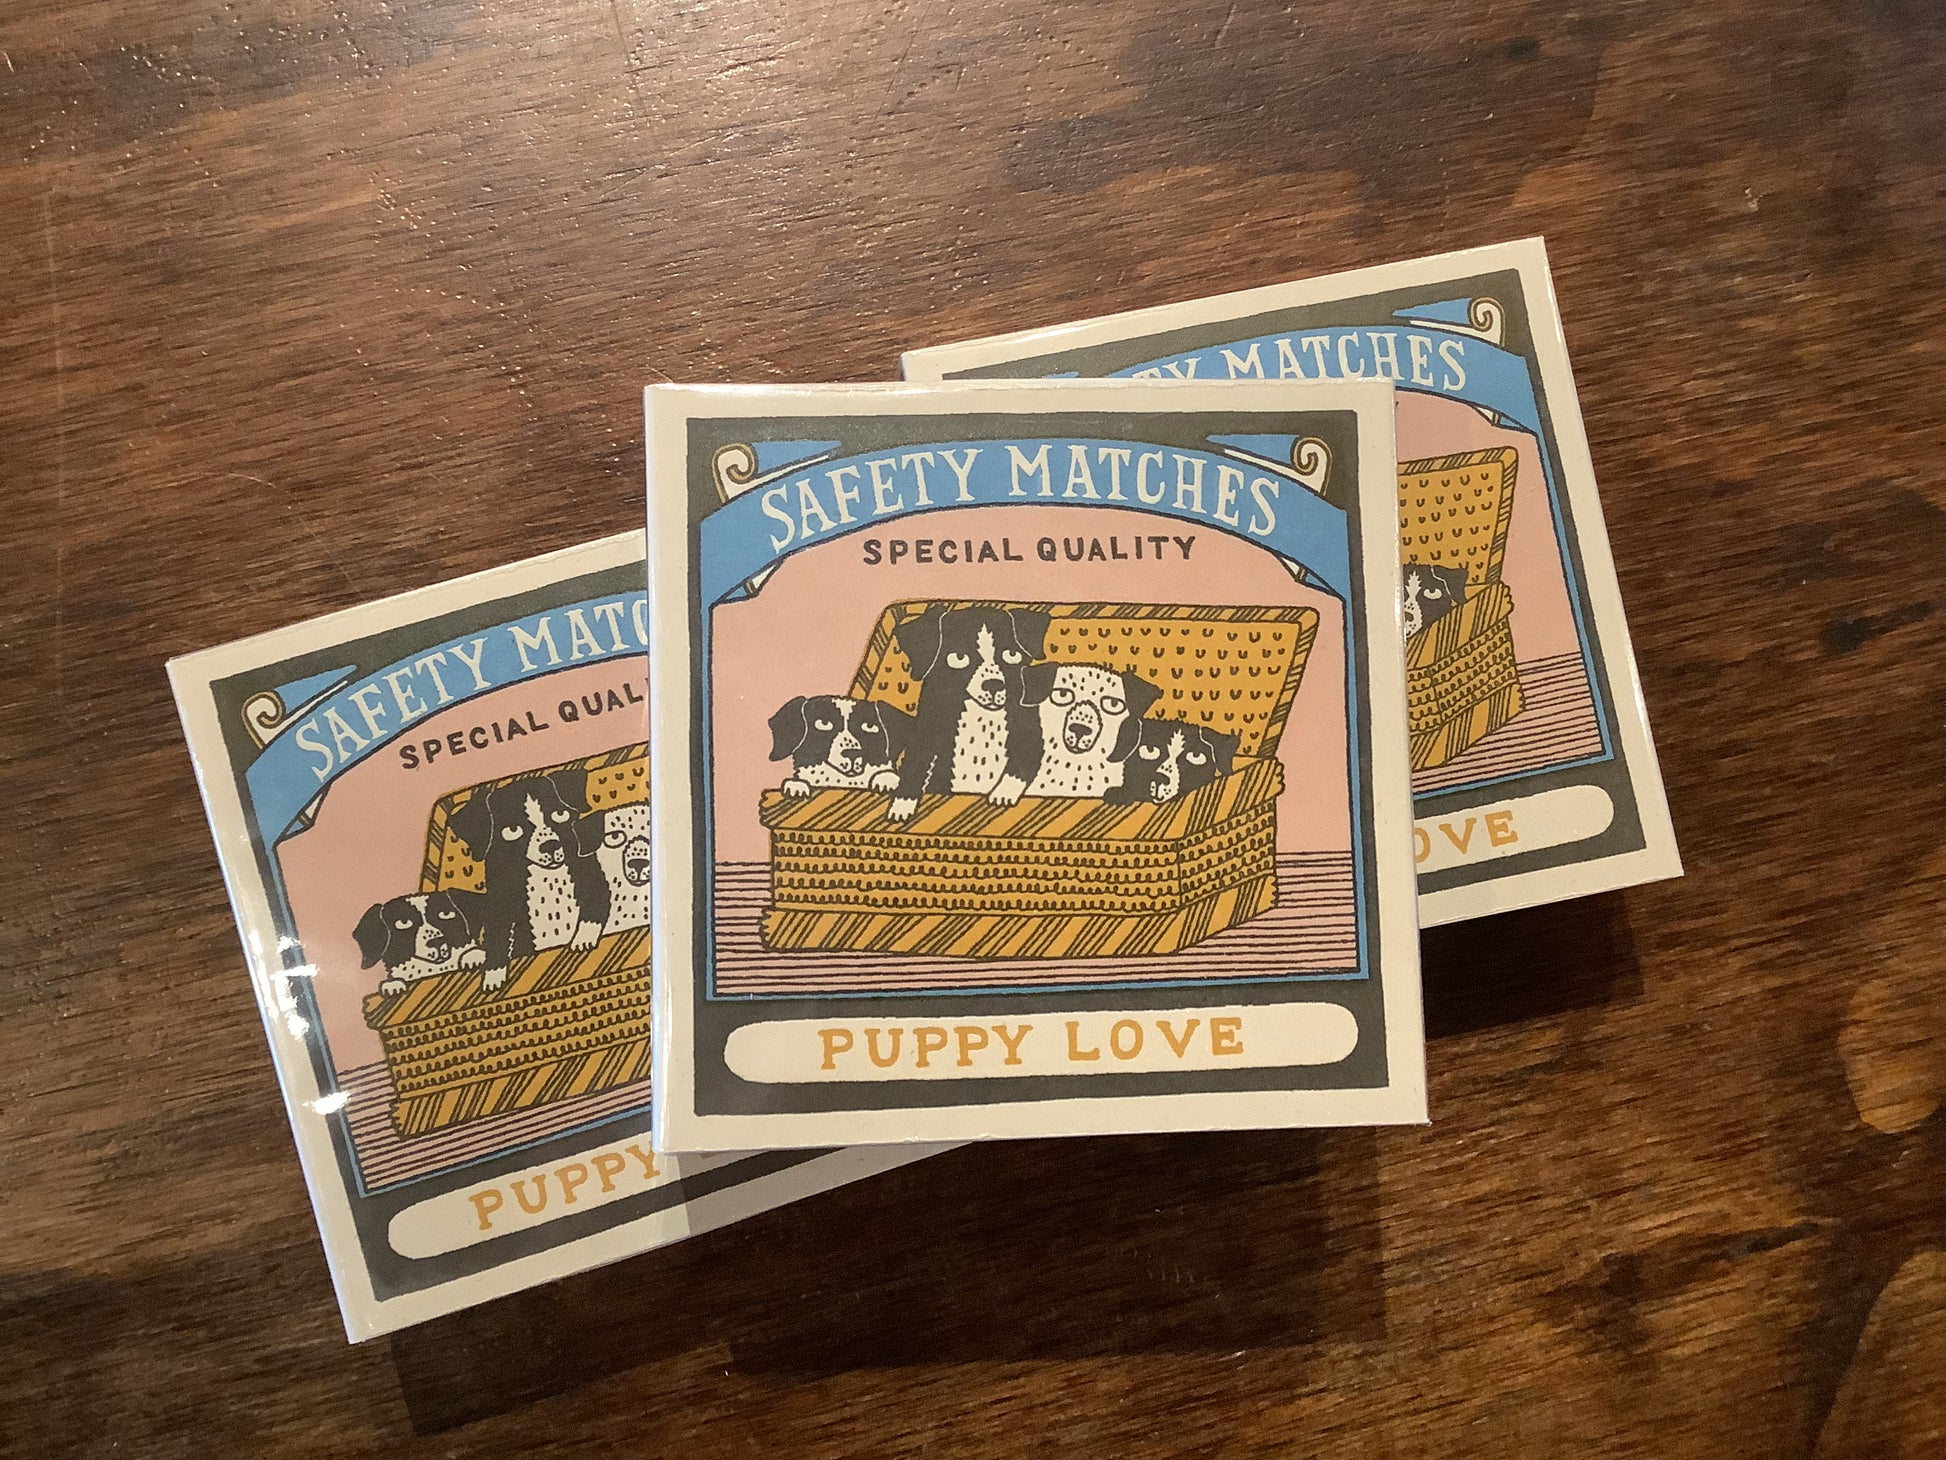 Luxury Matches (Square Matchboxes) - Archivist Gallery – BfD Bee